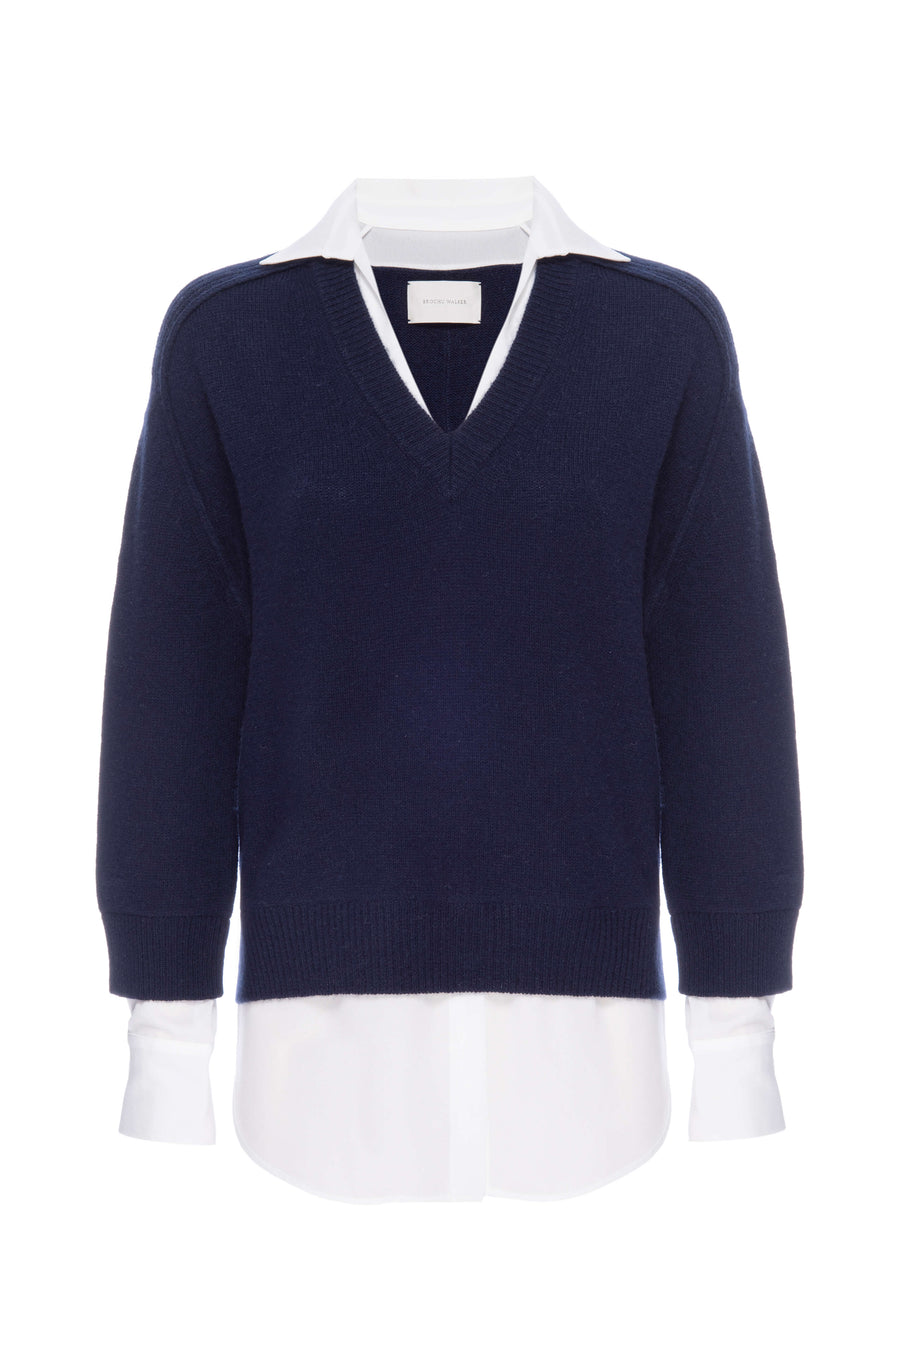 Looker navy layered v-neck sweater flat view